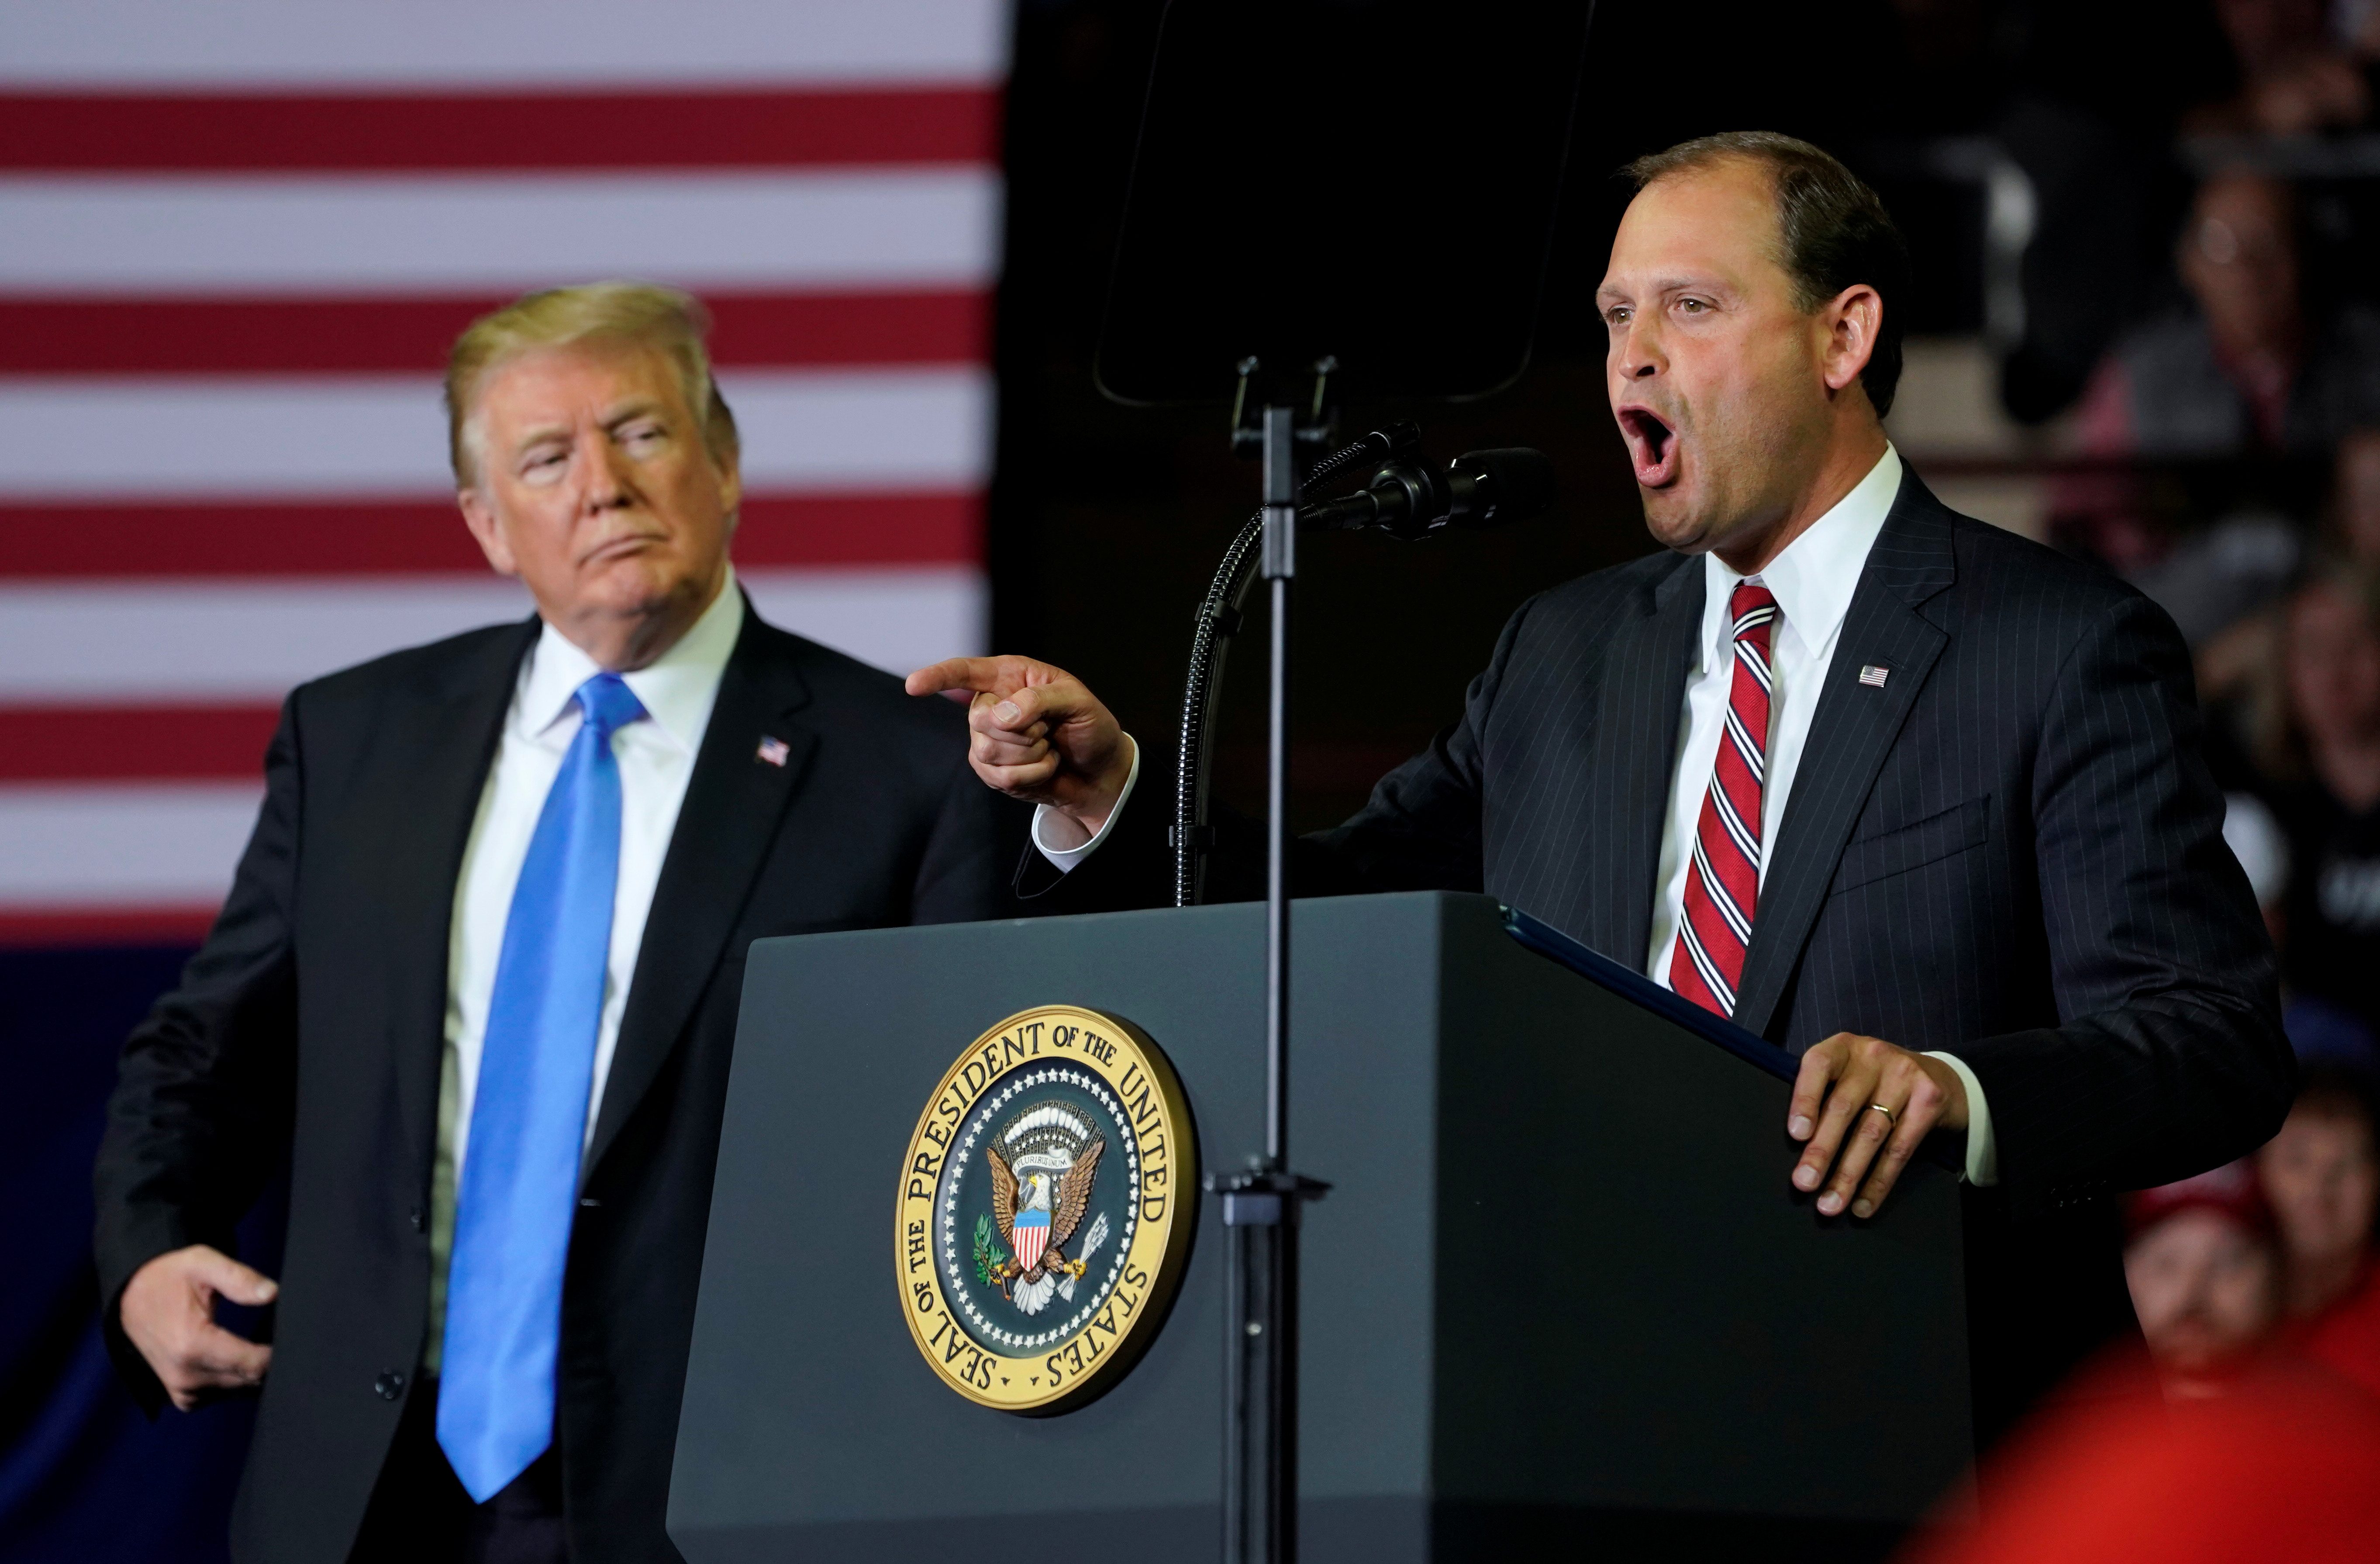 GOP Rep. Andy Barr of Kentucky speaks as U.S. President Donald Trump listens during a Make America Great Again rally in Richmond, Kentucky, U.S., October 13, 2018. REUTERS/Joshua Roberts